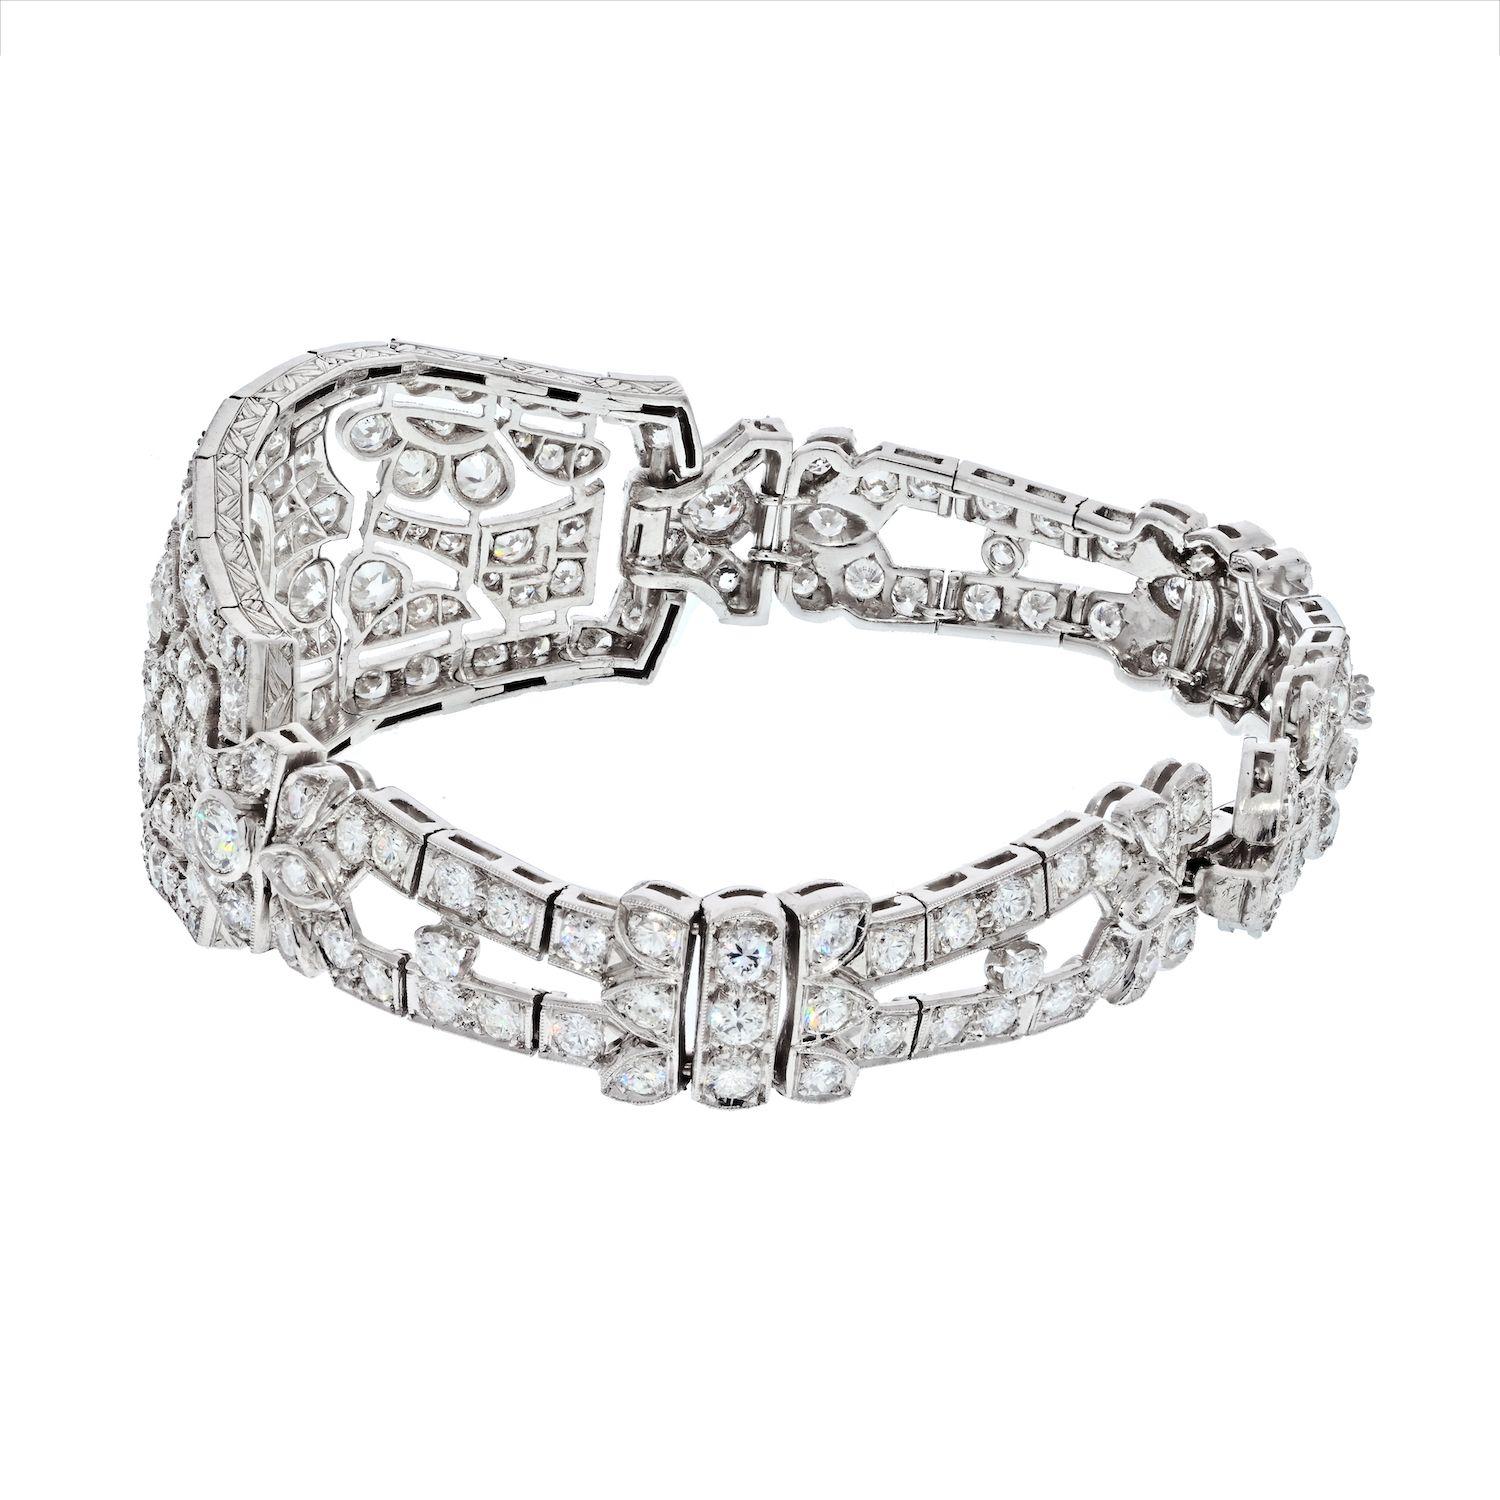 This gorgeous Art Deco bracelet features 12.00 carats of glittering diamonds and a beautiful filigree design in Platinum. The center diamond is a .75 carat old cut gem. The diamond is set in a suspended bezel mounting. A collection of old mine cut